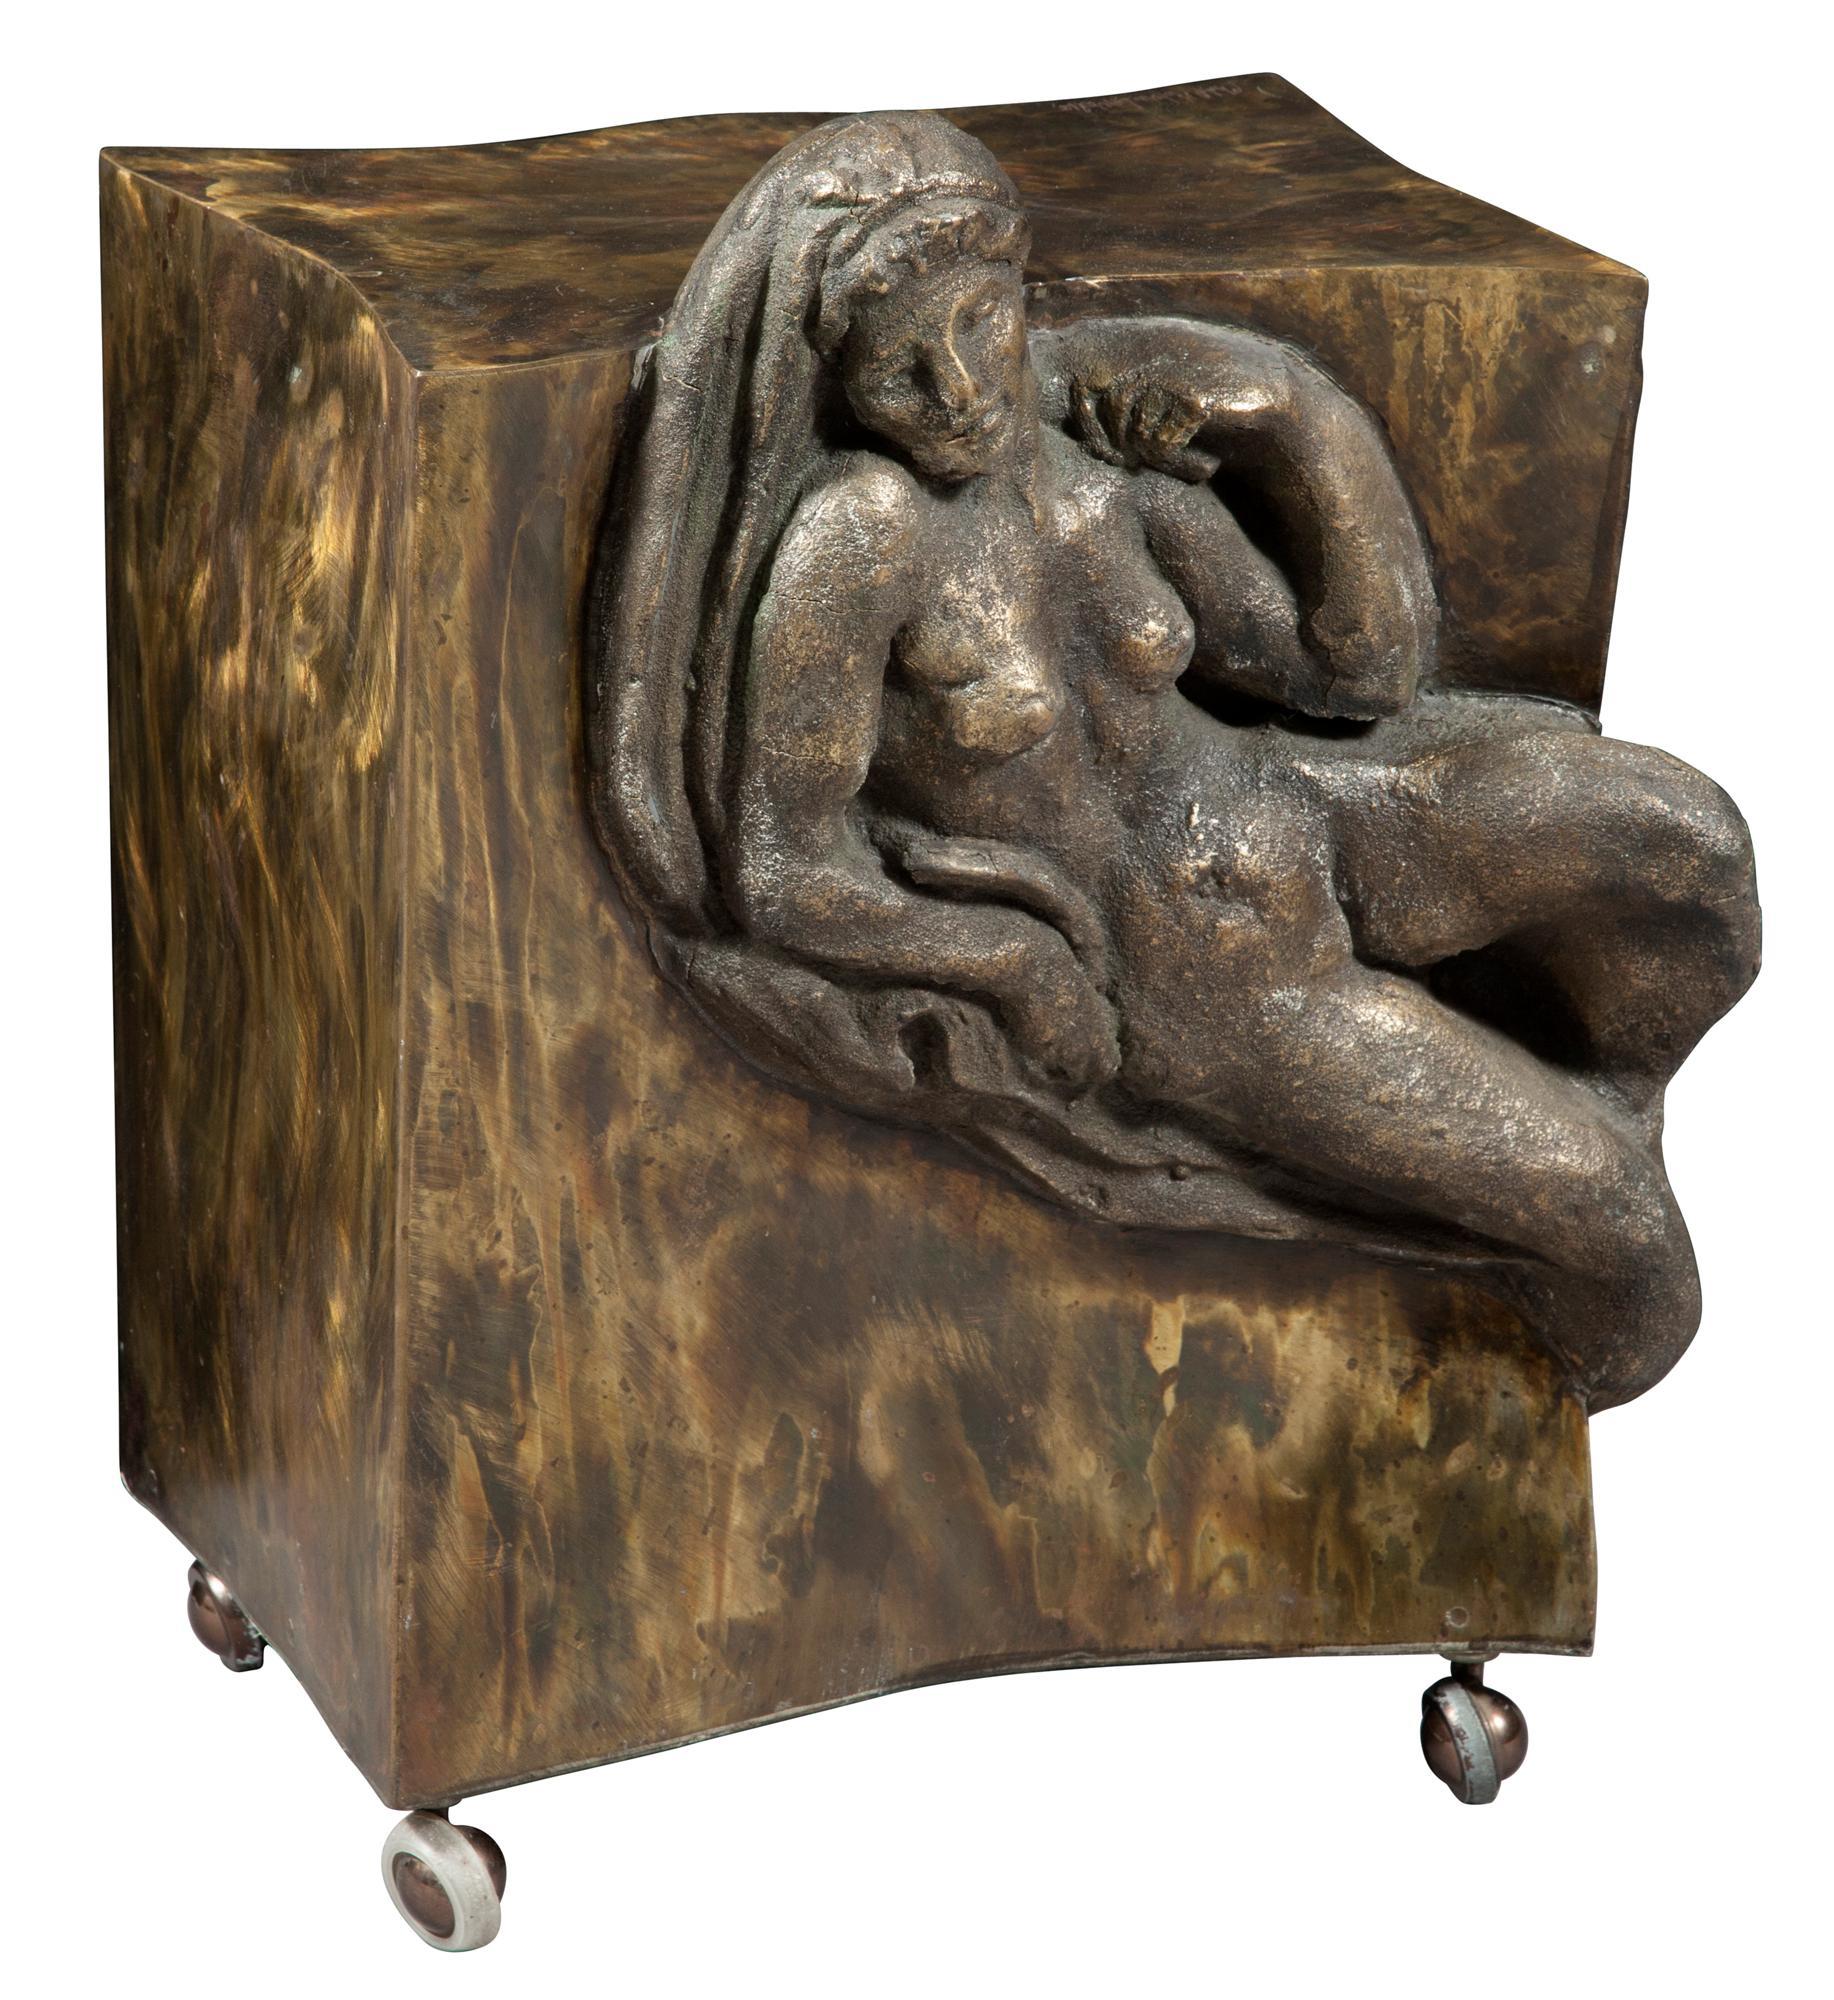 Philip and Kelvin LaVerne figural cube end table. This signed, circa 1970s bronze cube table on casters by this highly sought after father and son duo is said to be the only one currently on the market. This stunning bronze cube table having a naked